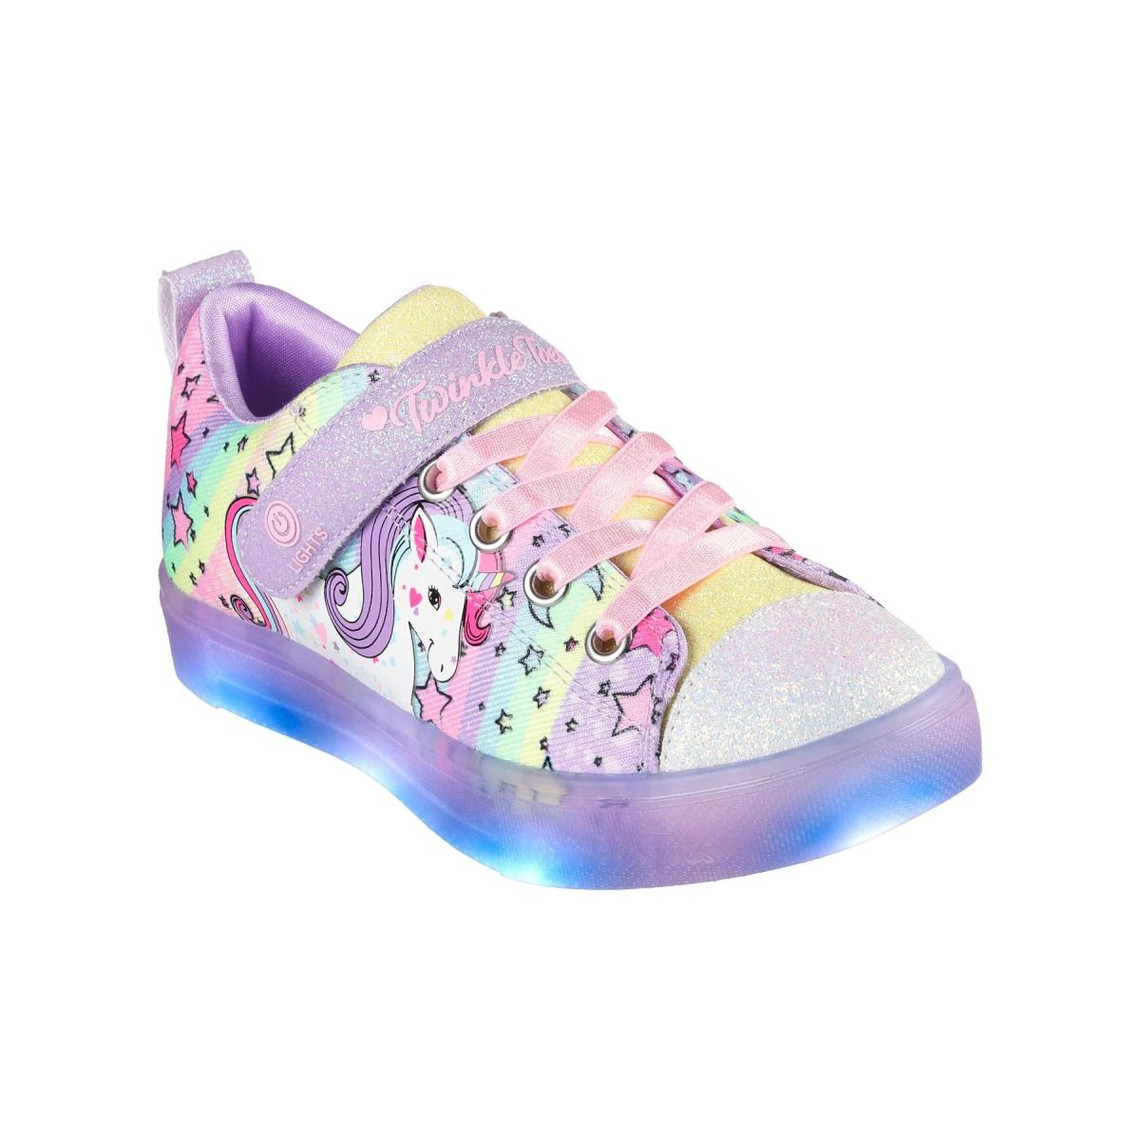 Sneakers lumineux enfant TWINKLE SPARKS ICE - UNICORN violet